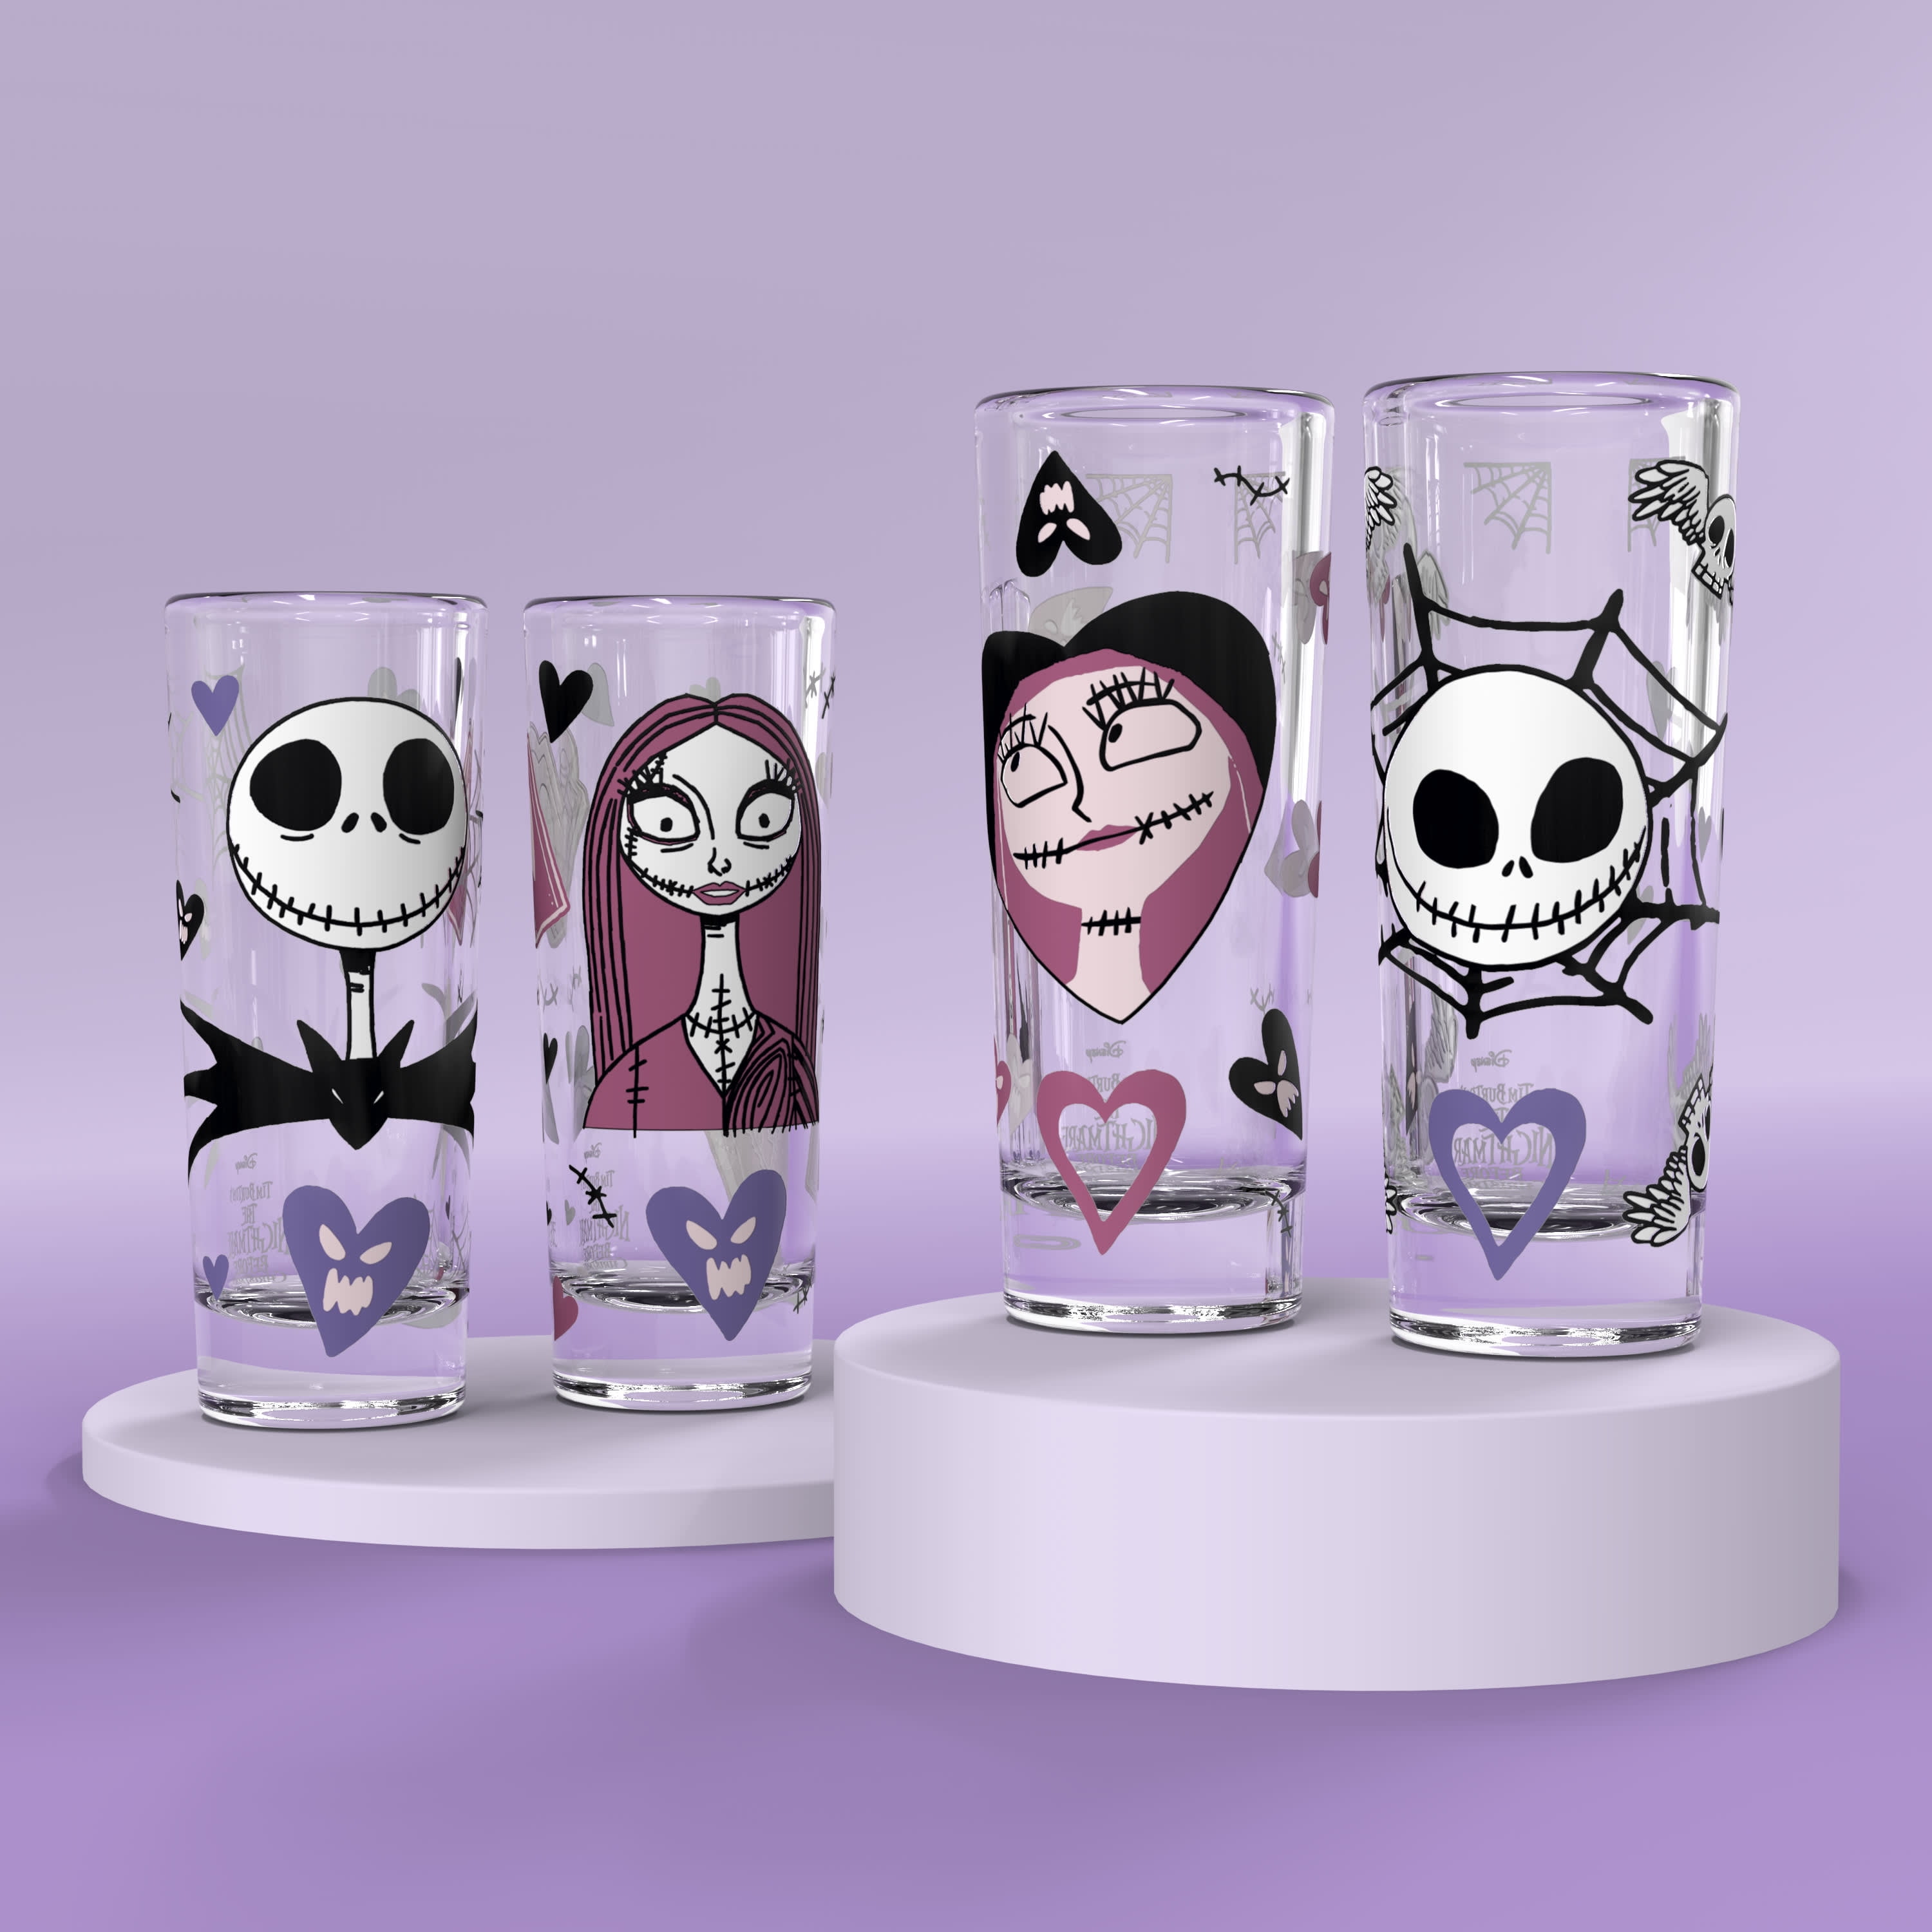 Nightmare Before Christmas Characters 4 Piece 9oz Rock Glass Set